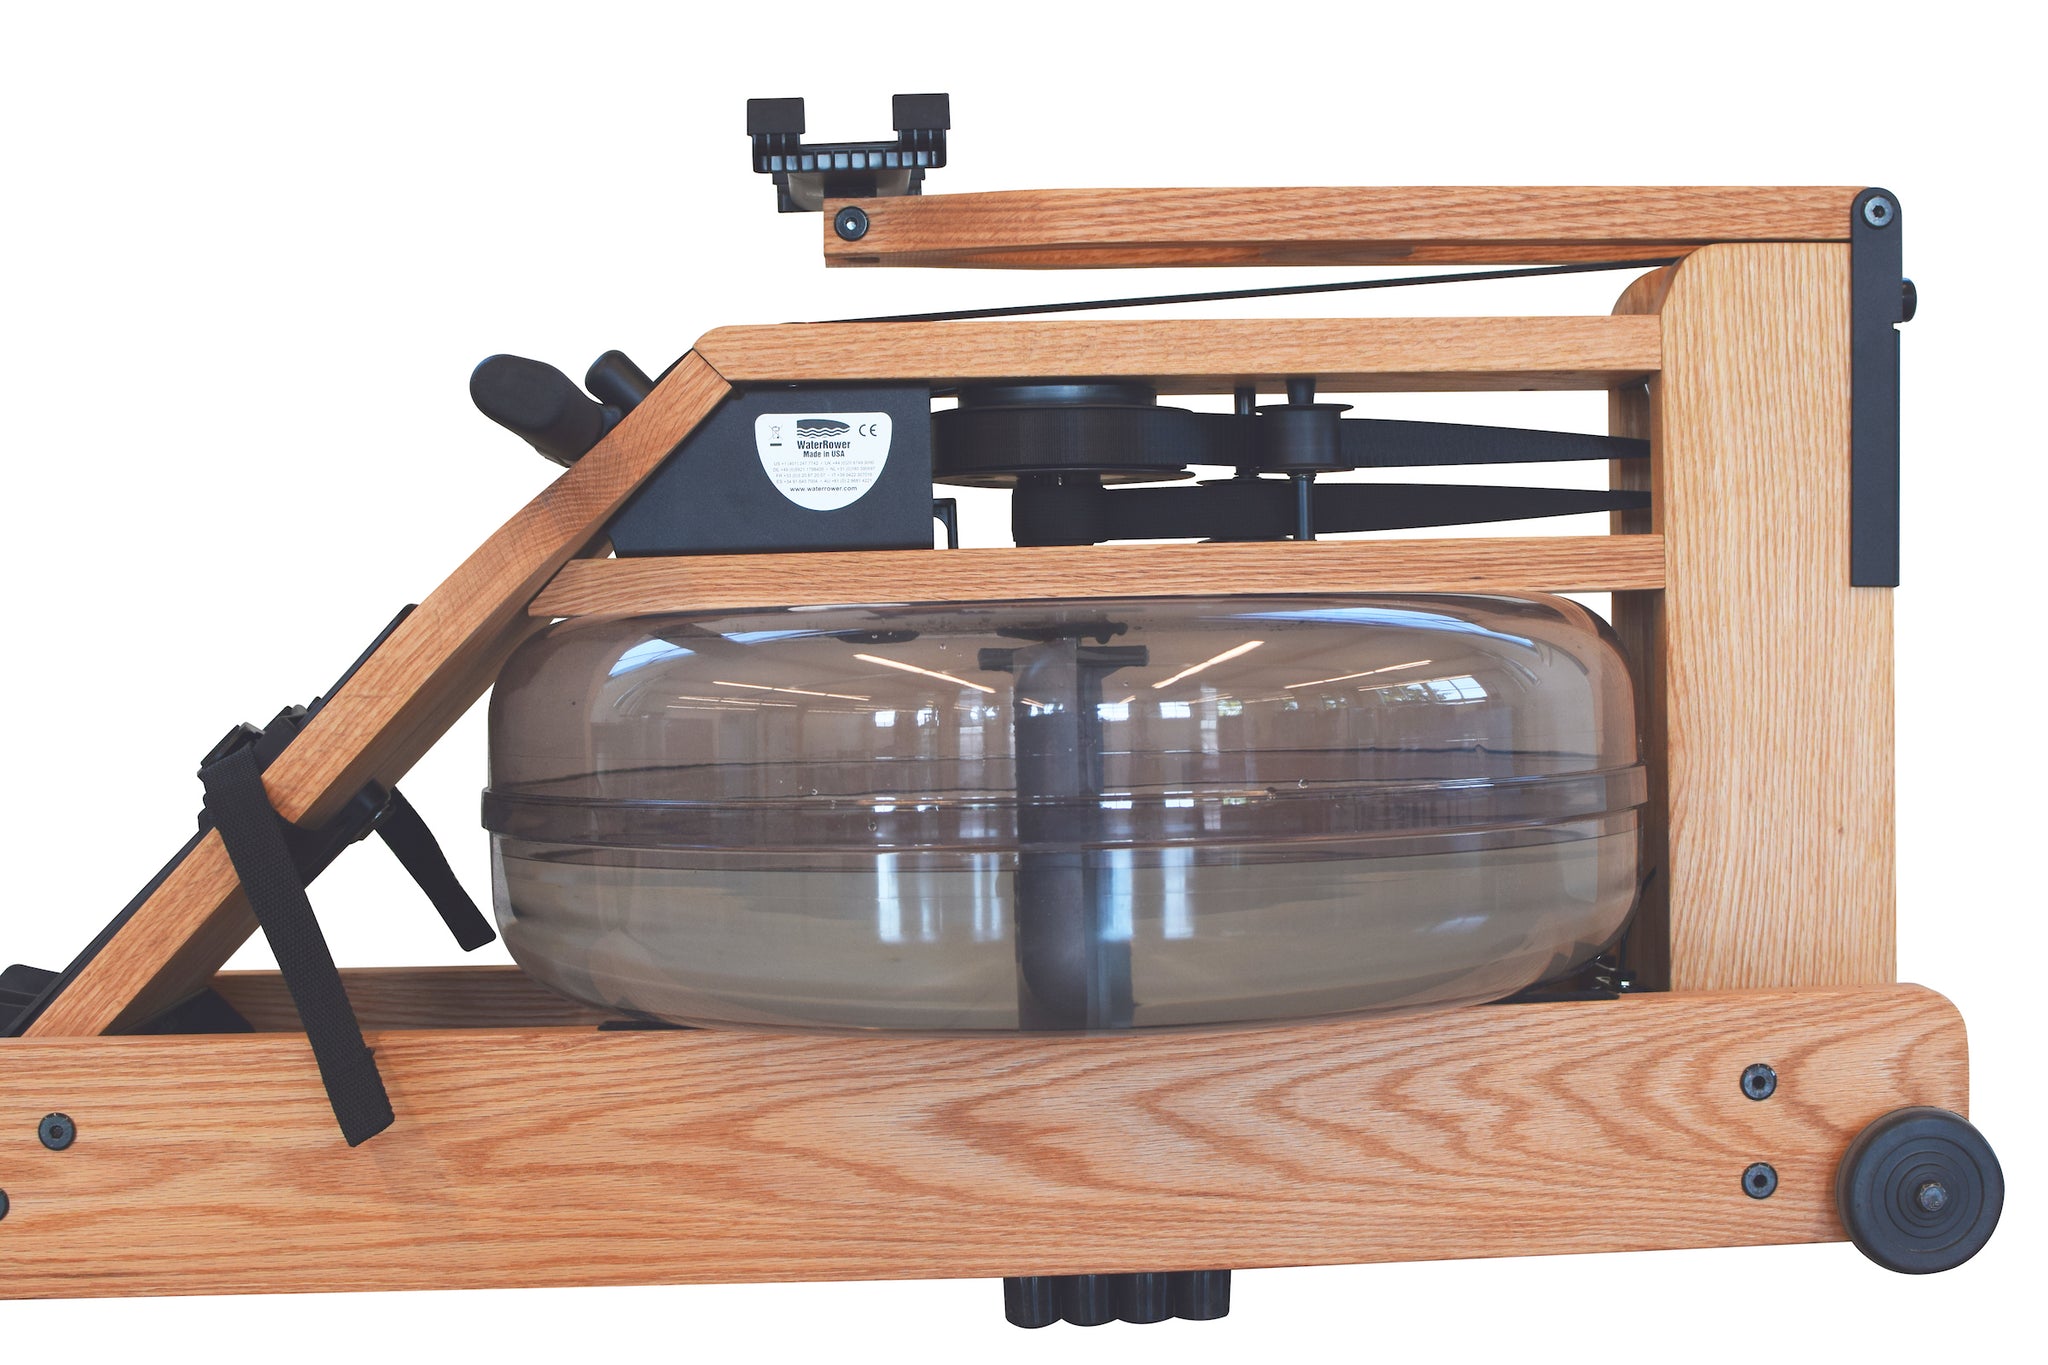 Water Rower, Tablet, Holder